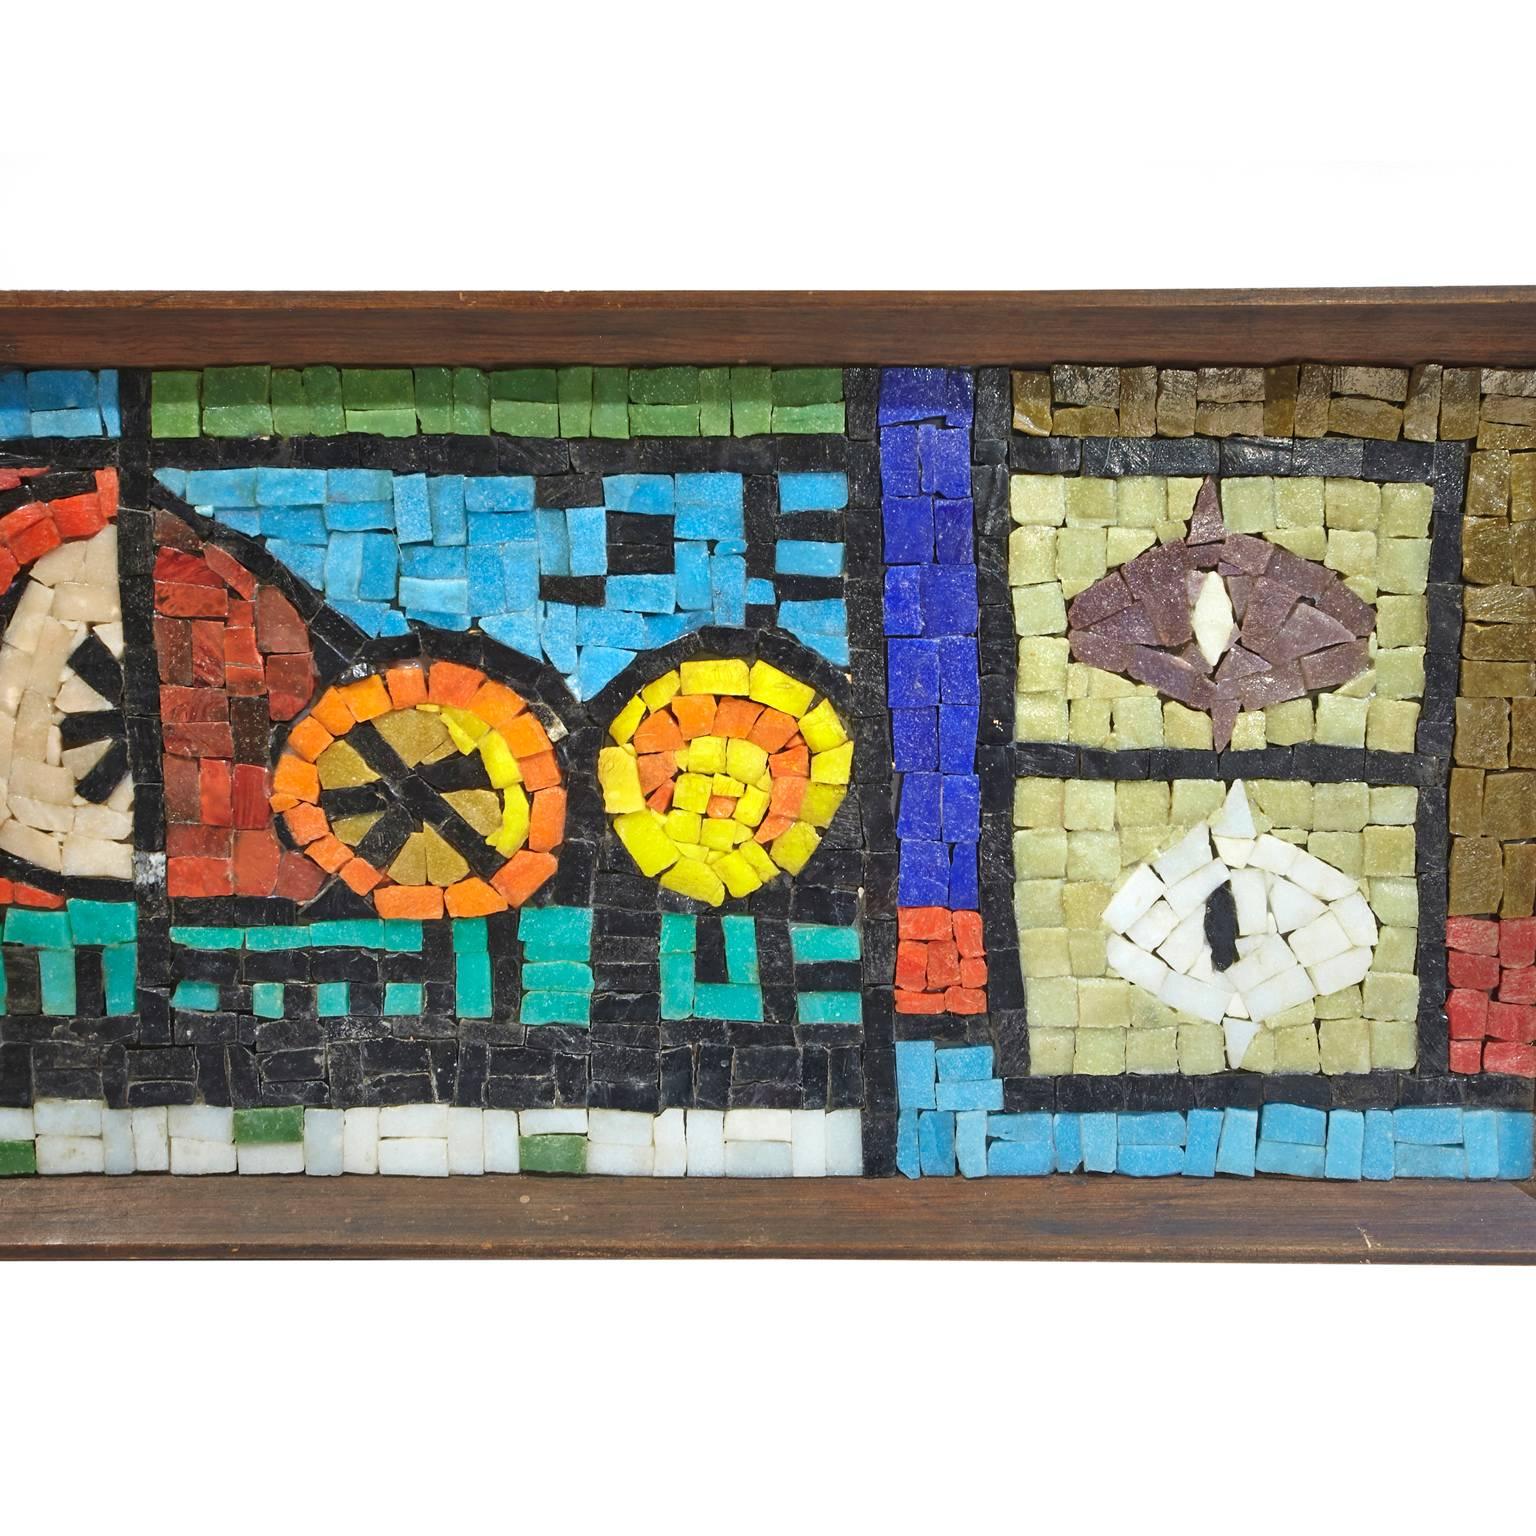 Evelyn Ackerman Mosaic Tile Wall Hanging In Good Condition For Sale In Tucson, AZ